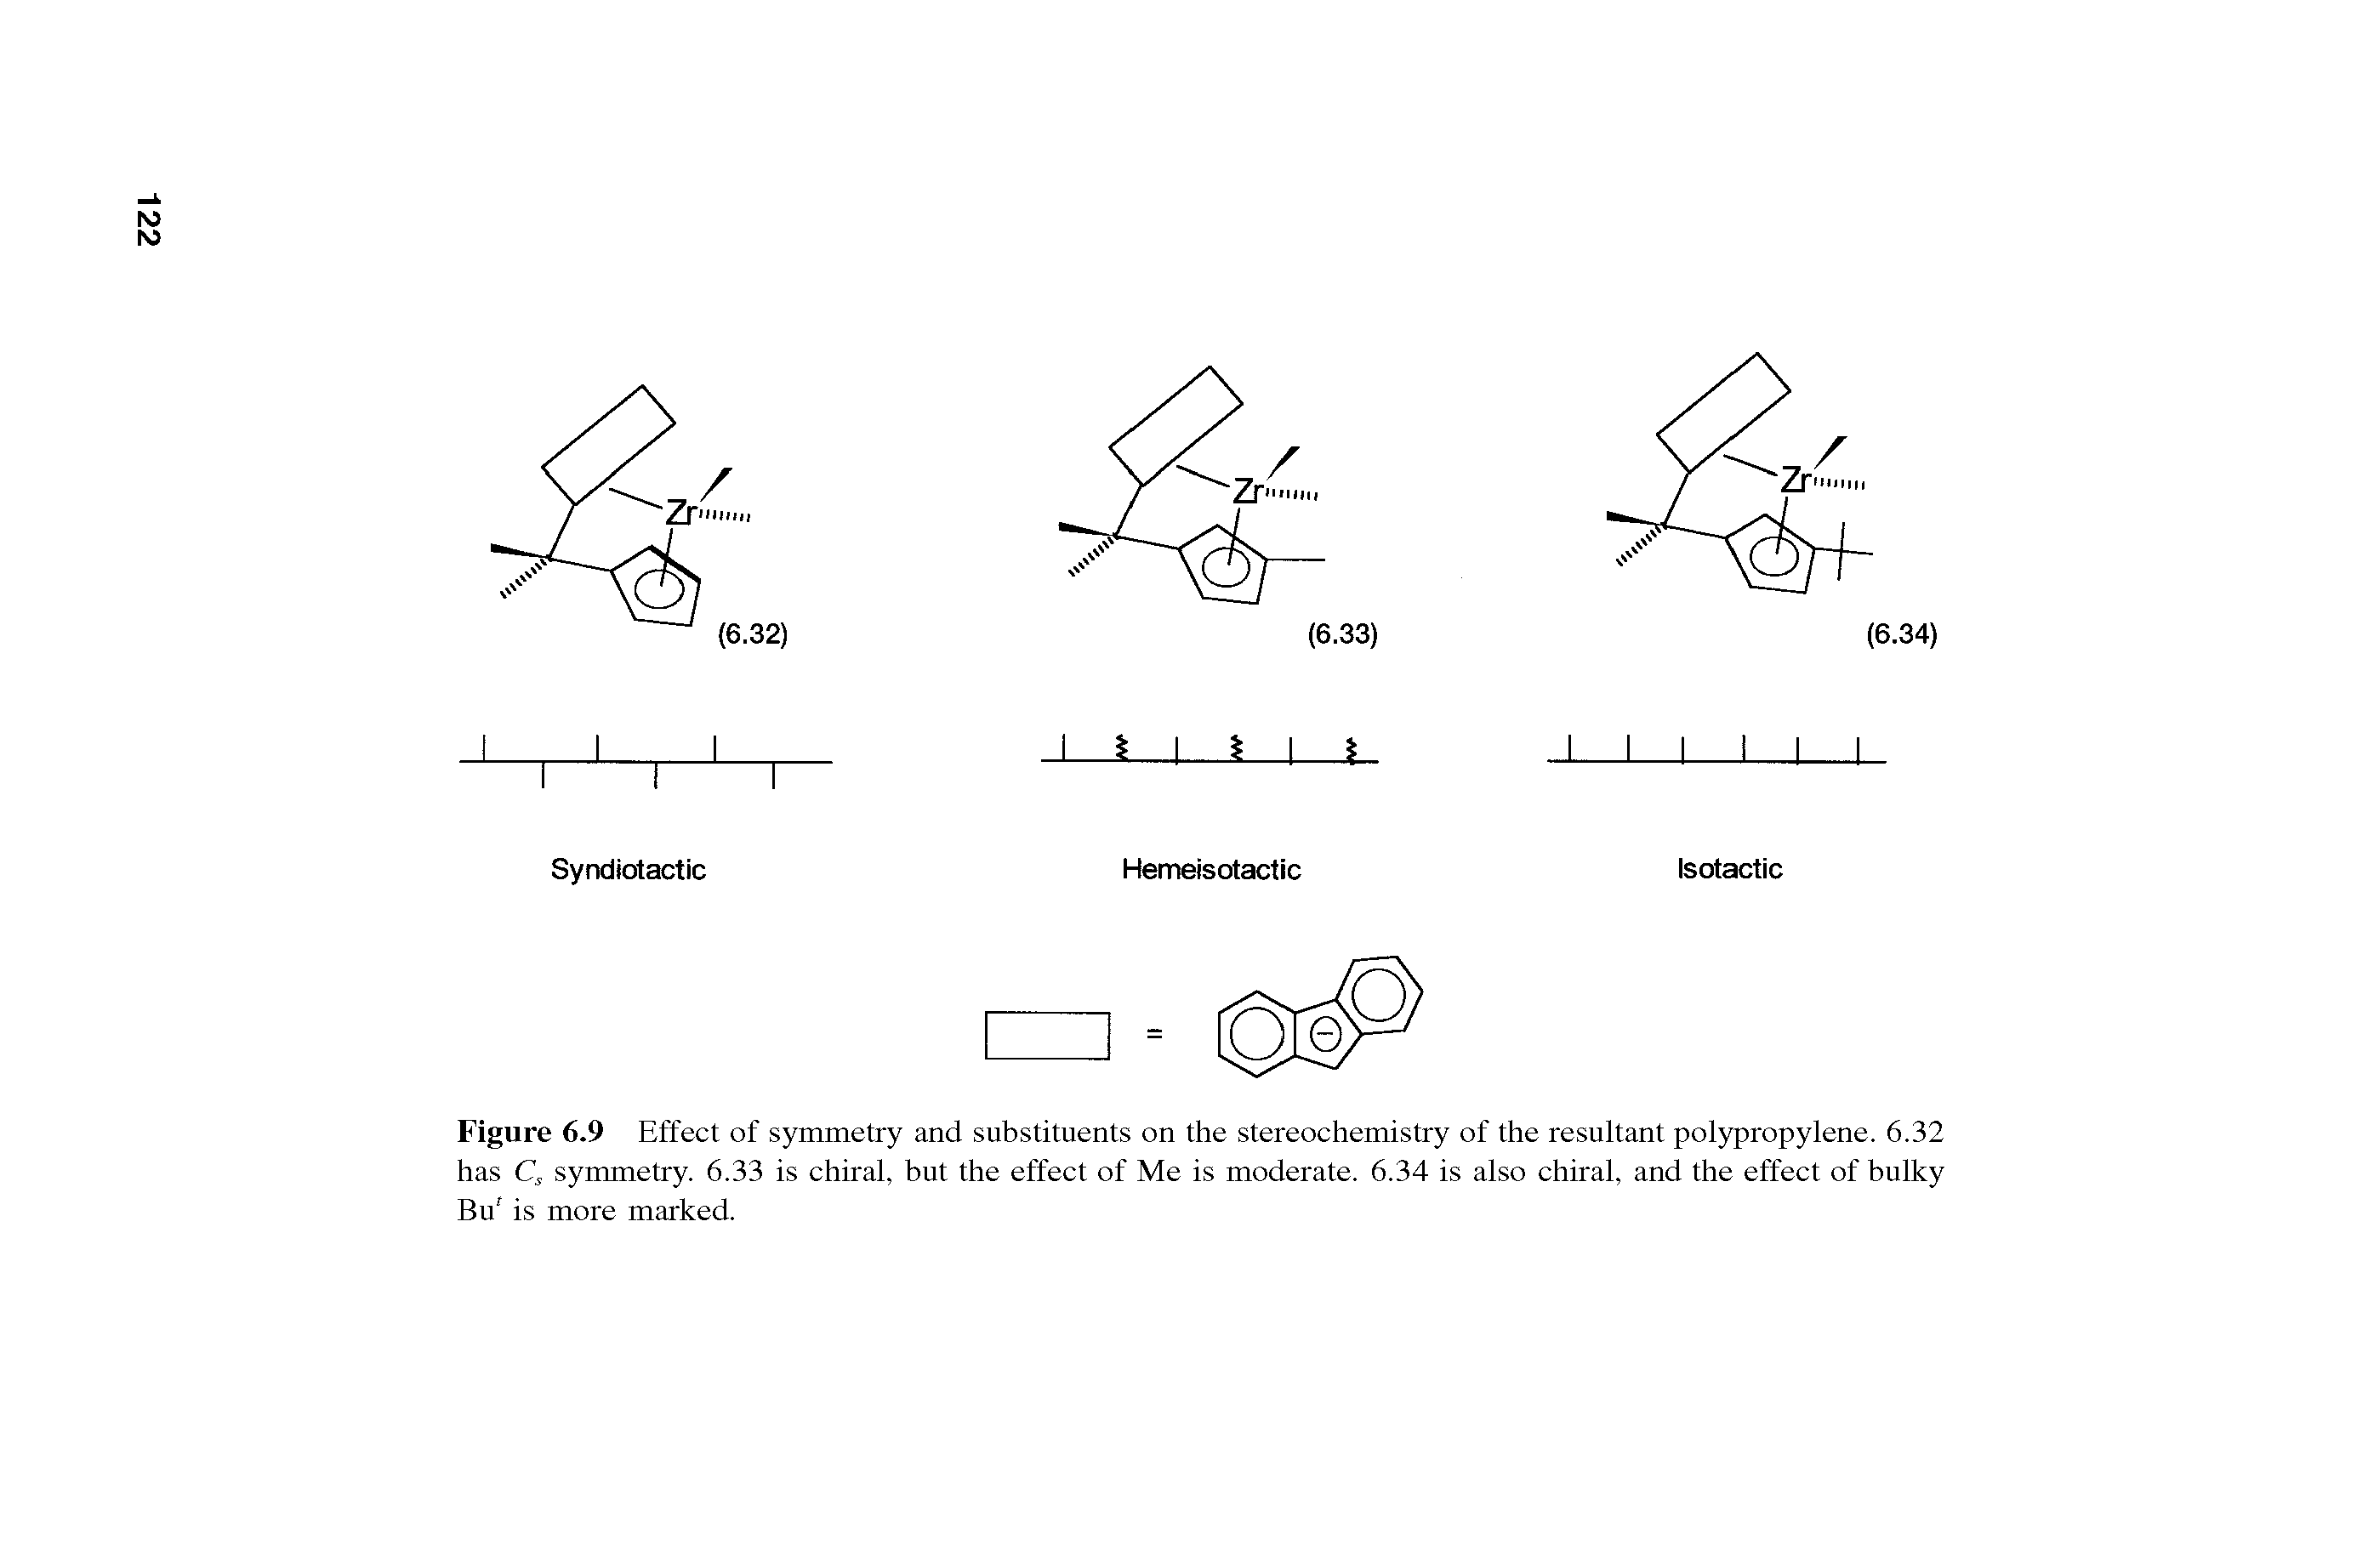 Figure 6.9 Effect of symmetry and substituents on the stereochemistry of the resultant polypropylene. 6.32 has Cs symmetry. 6.33 is chiral, but the effect of Me is moderate. 6.34 is also chiral, and the effect of bulky Bu is more marked.